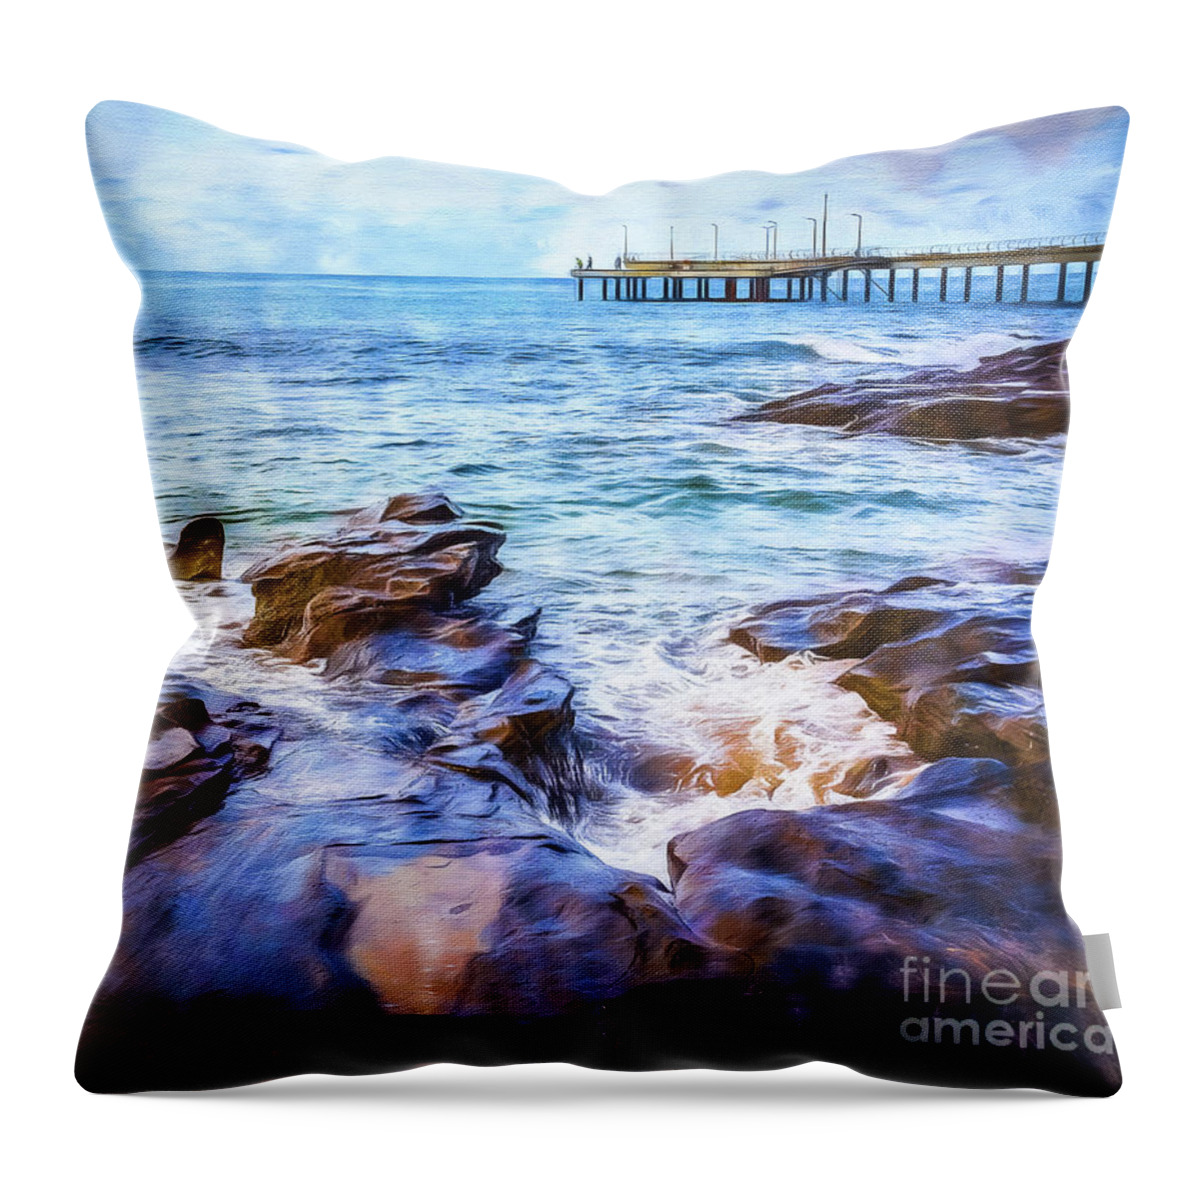 Rocks Throw Pillow featuring the photograph On the Rocks by Perry Webster